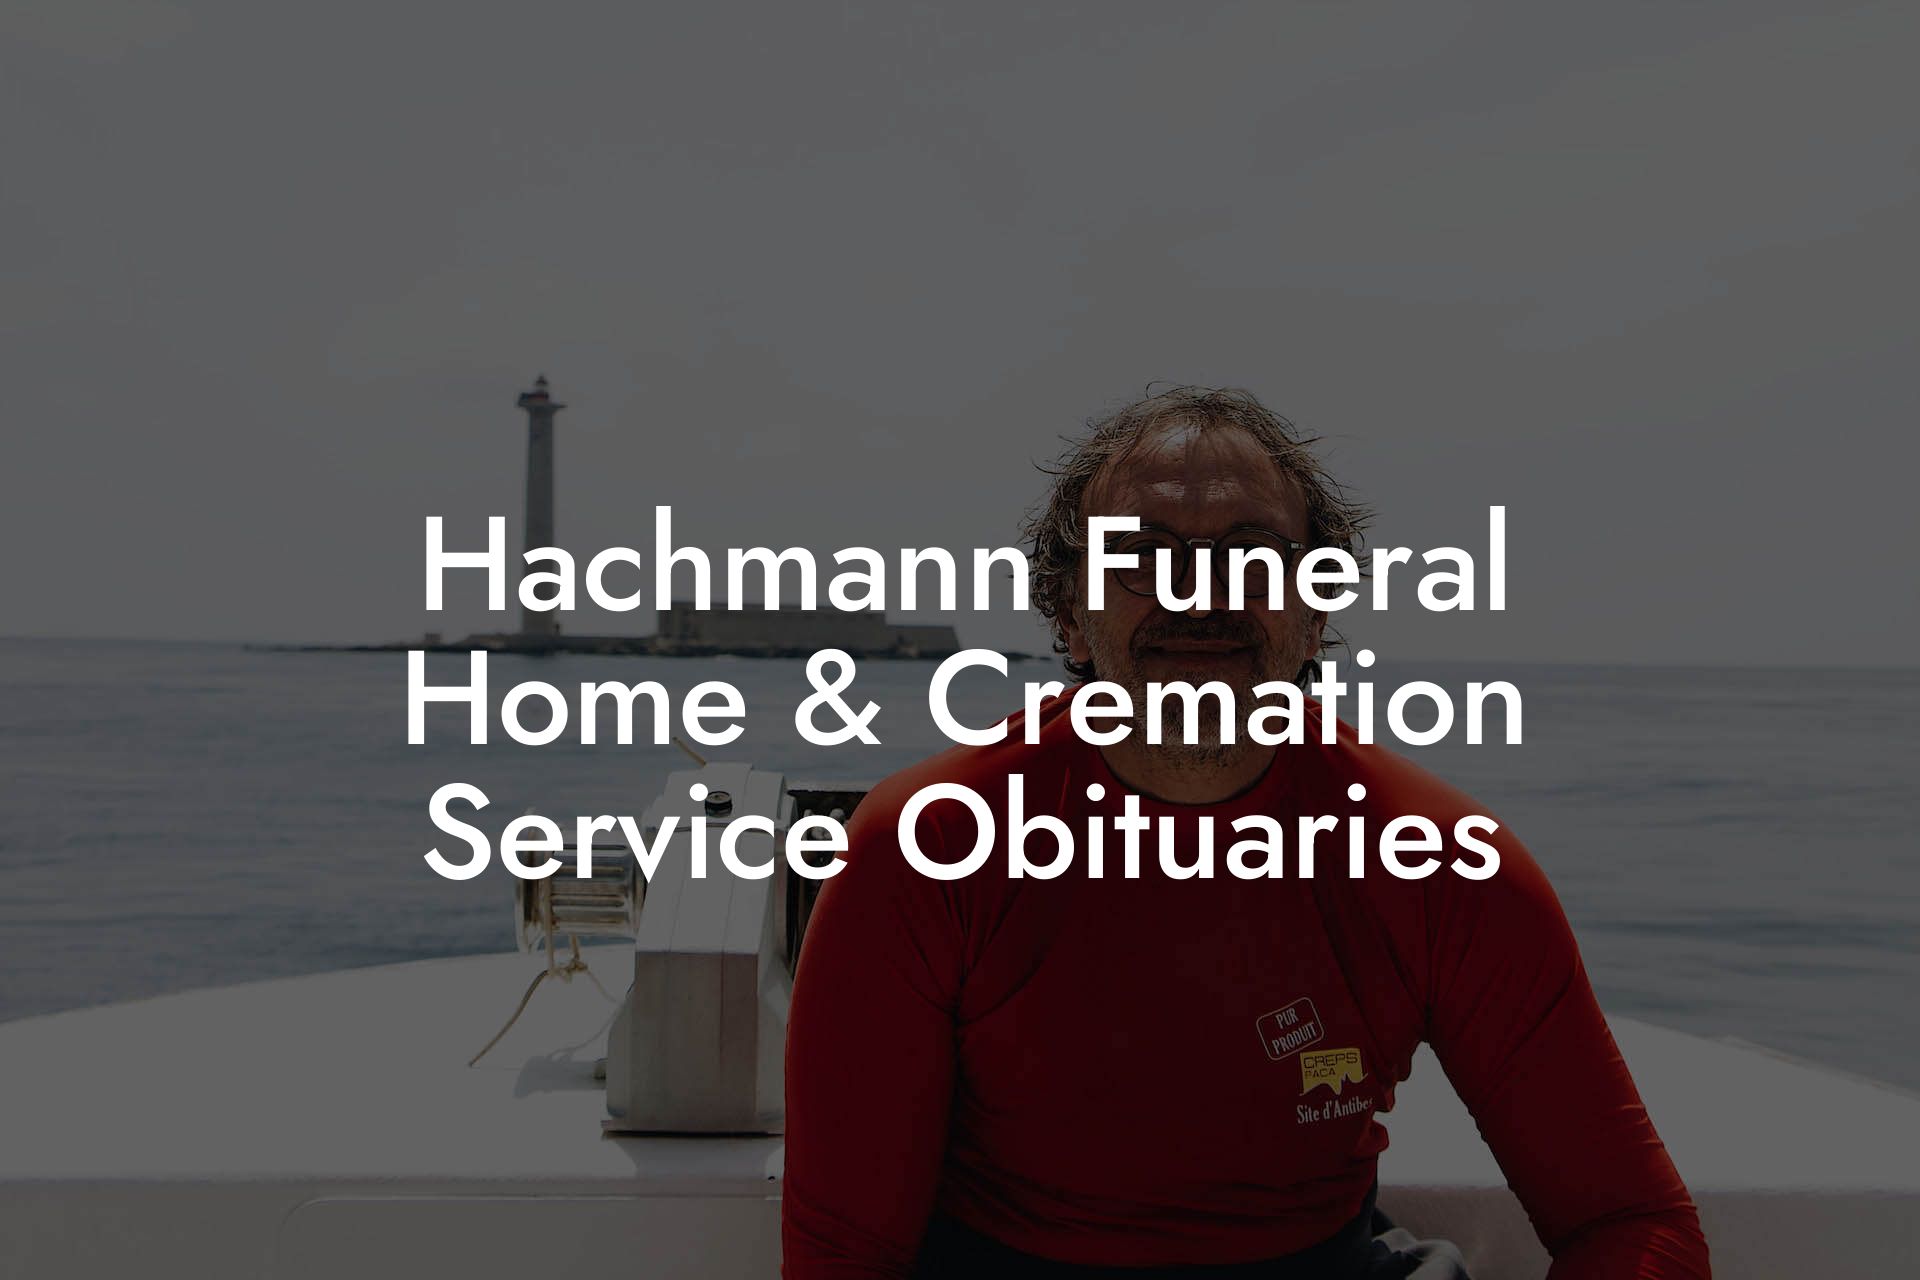 Hachmann Funeral Home & Cremation Service Obituaries